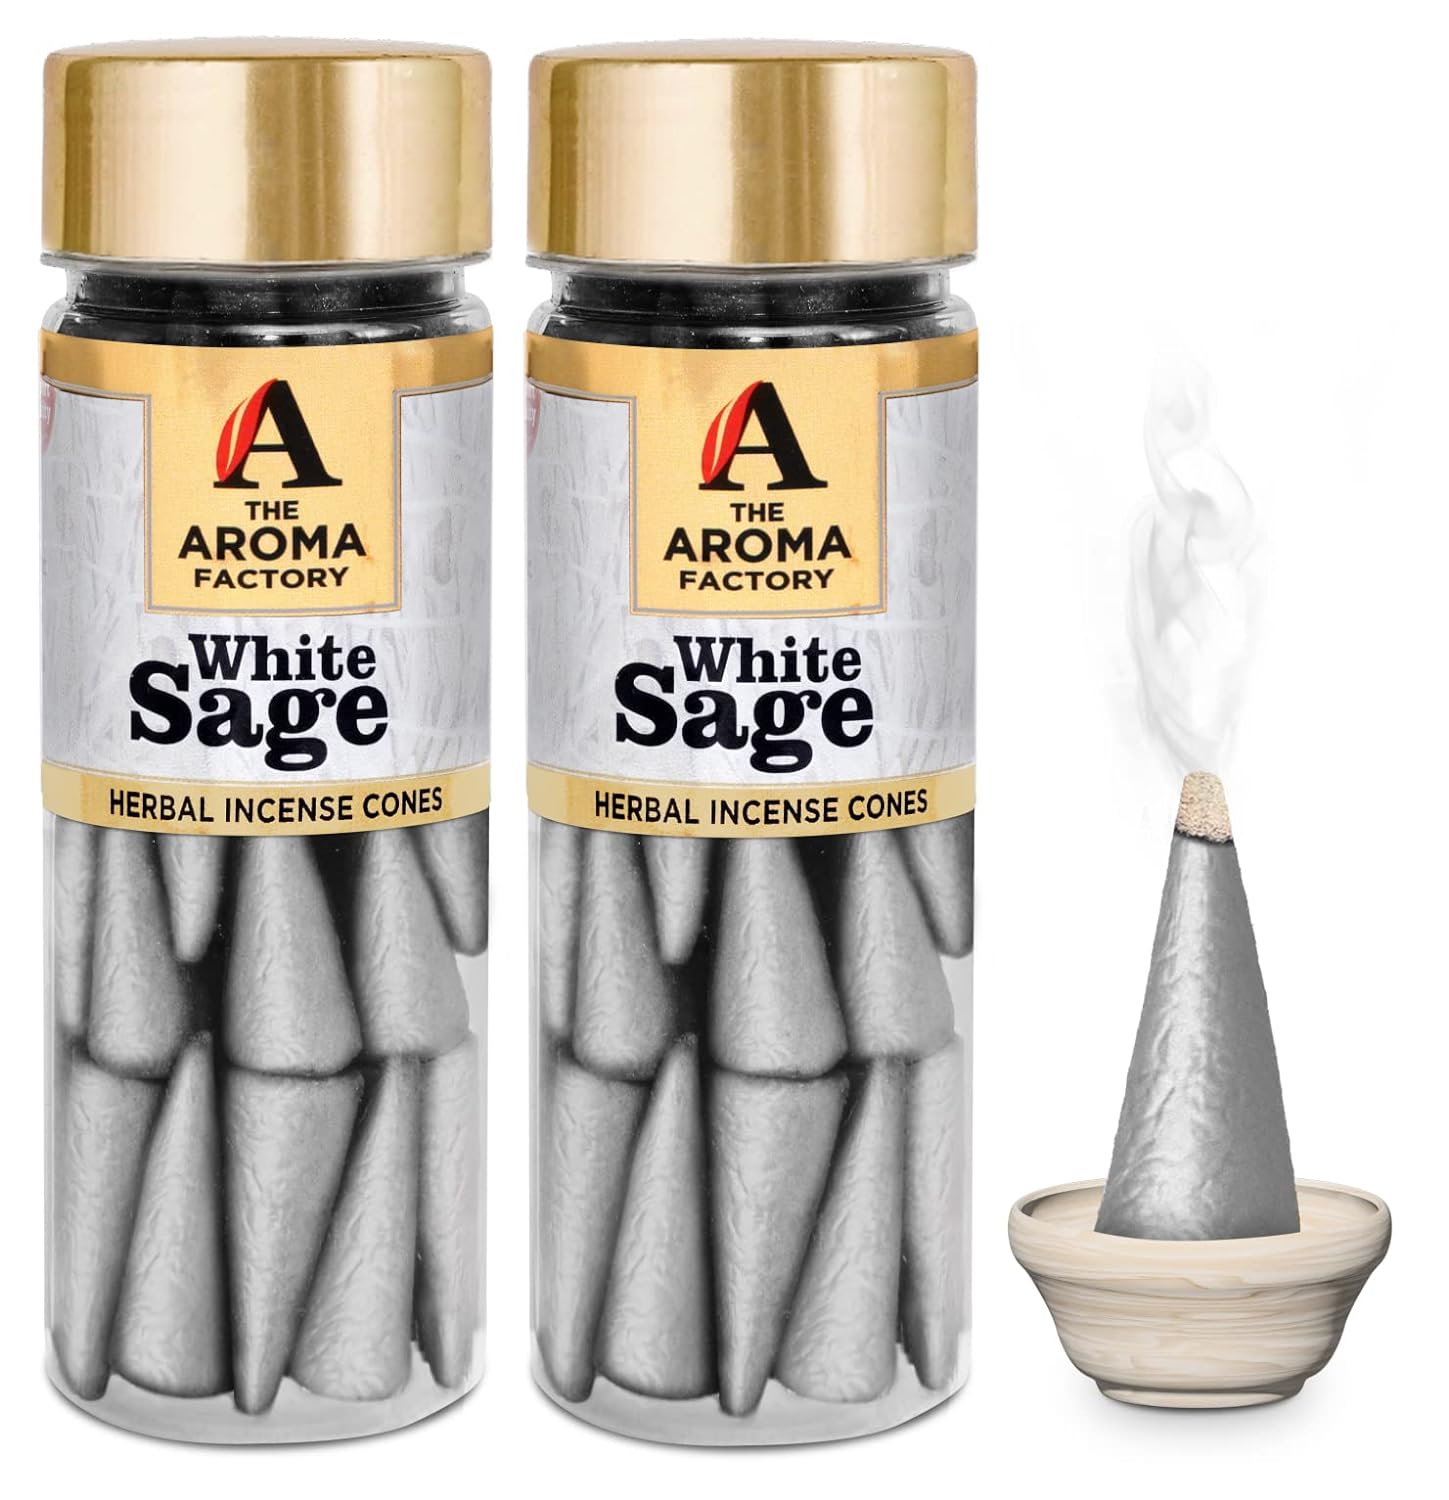 The Aroma Factory Incense Dhoop Cone for Pooja, White Sage (100% Herbal & 0% Charcoal) 2 Bottles x 30 Cones